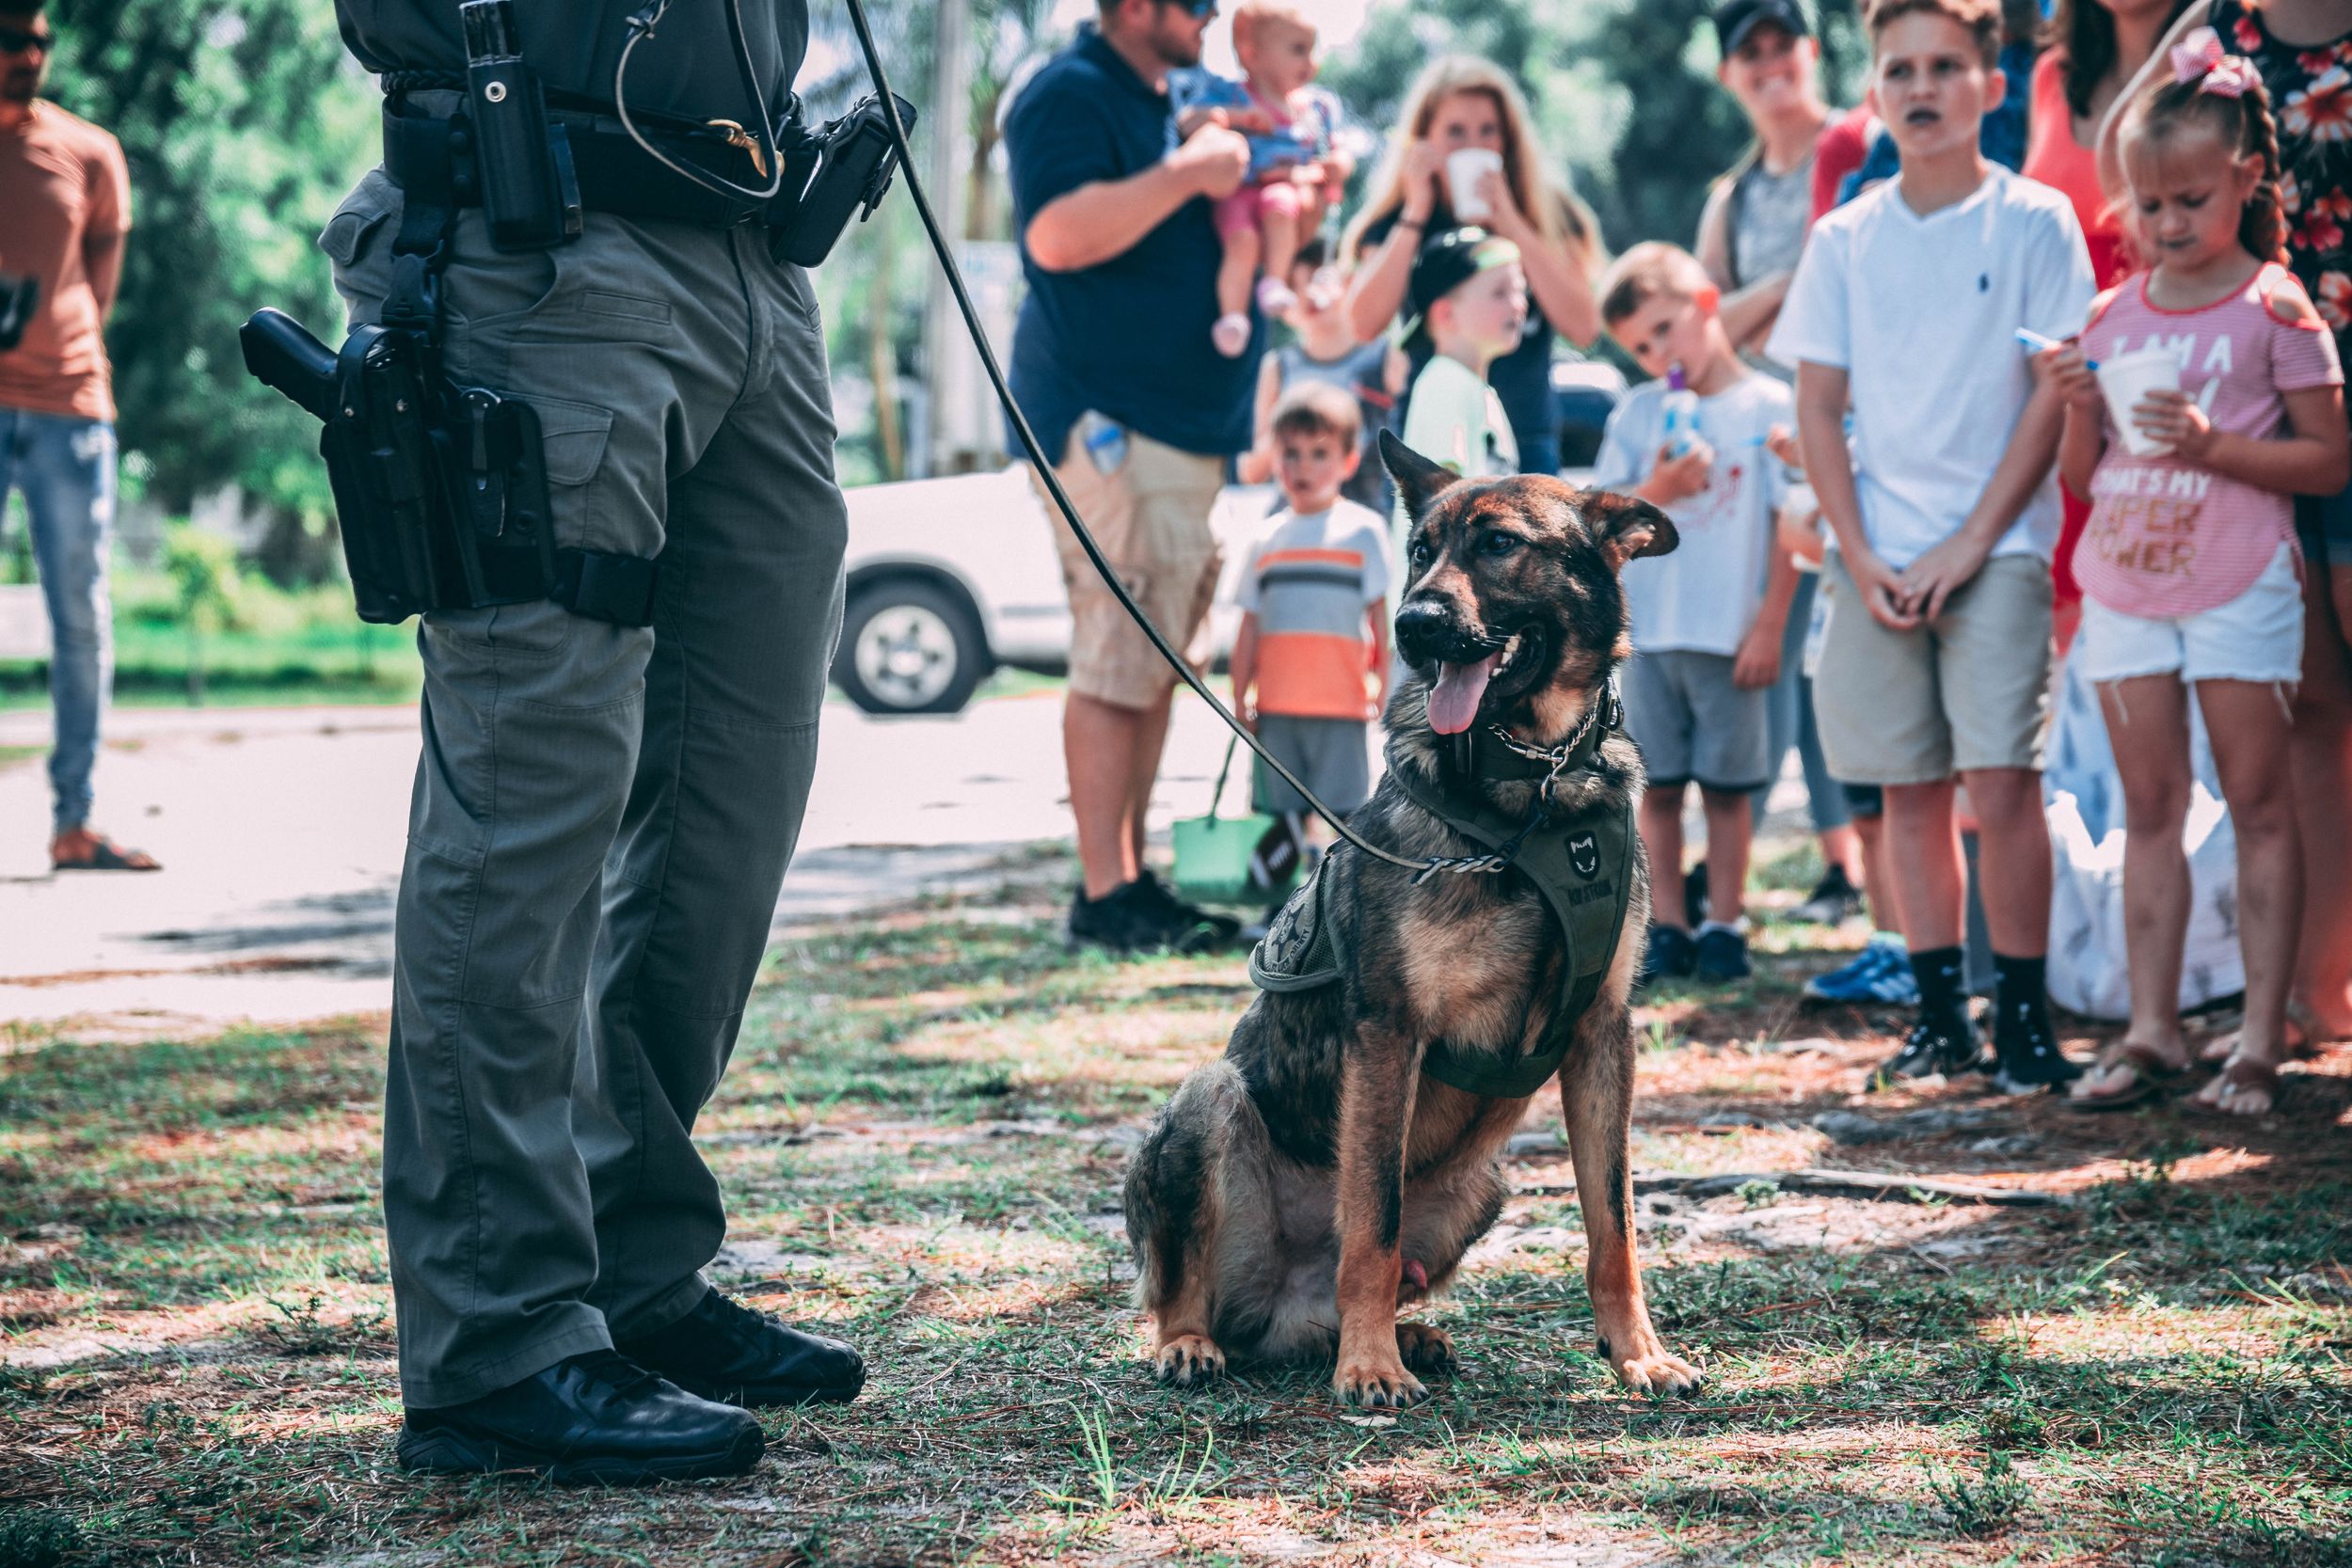 Police officer shows his K9 to a group of children